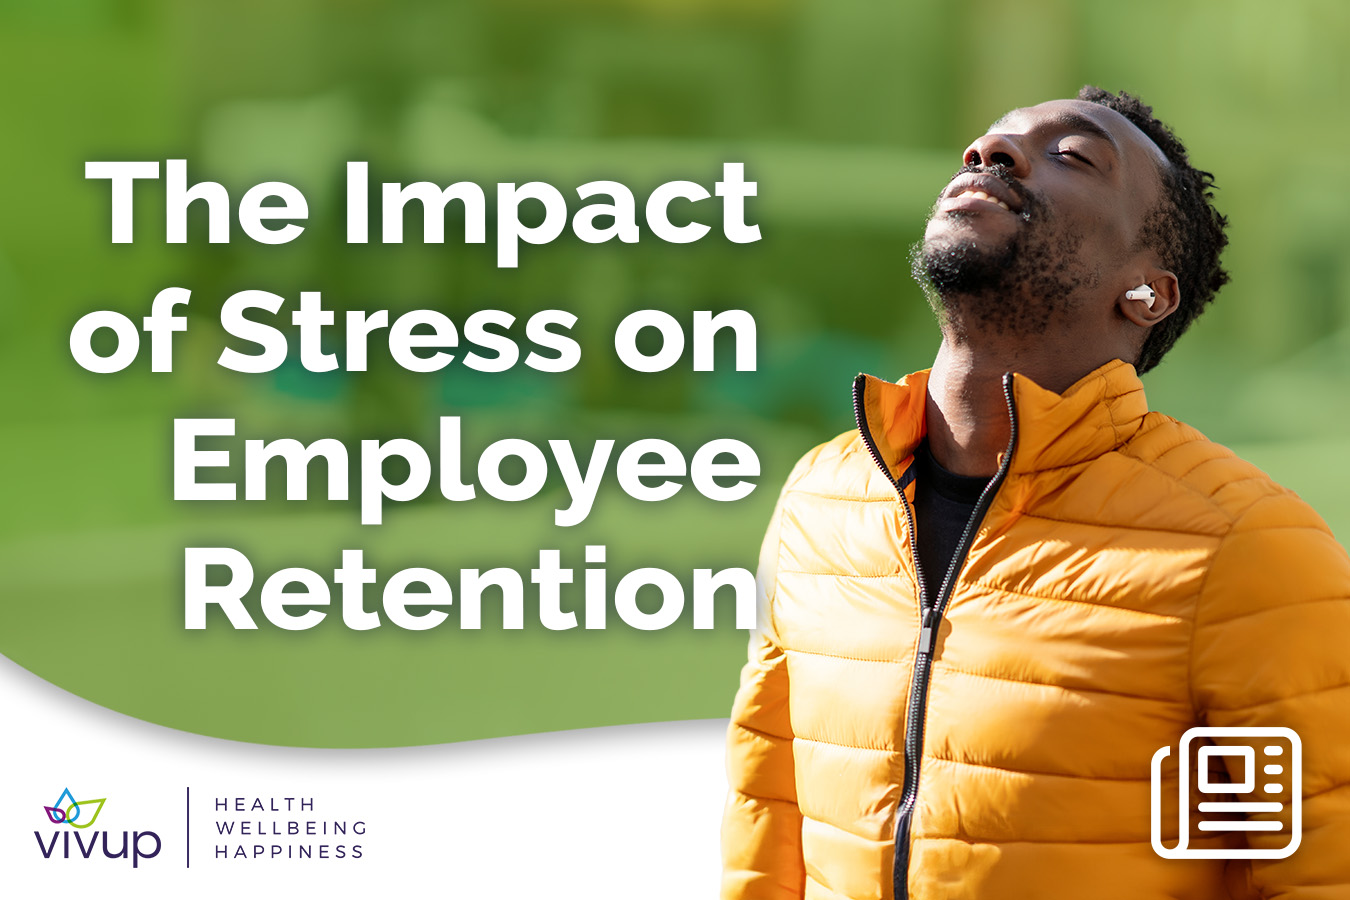 The impact of stress on employee retention